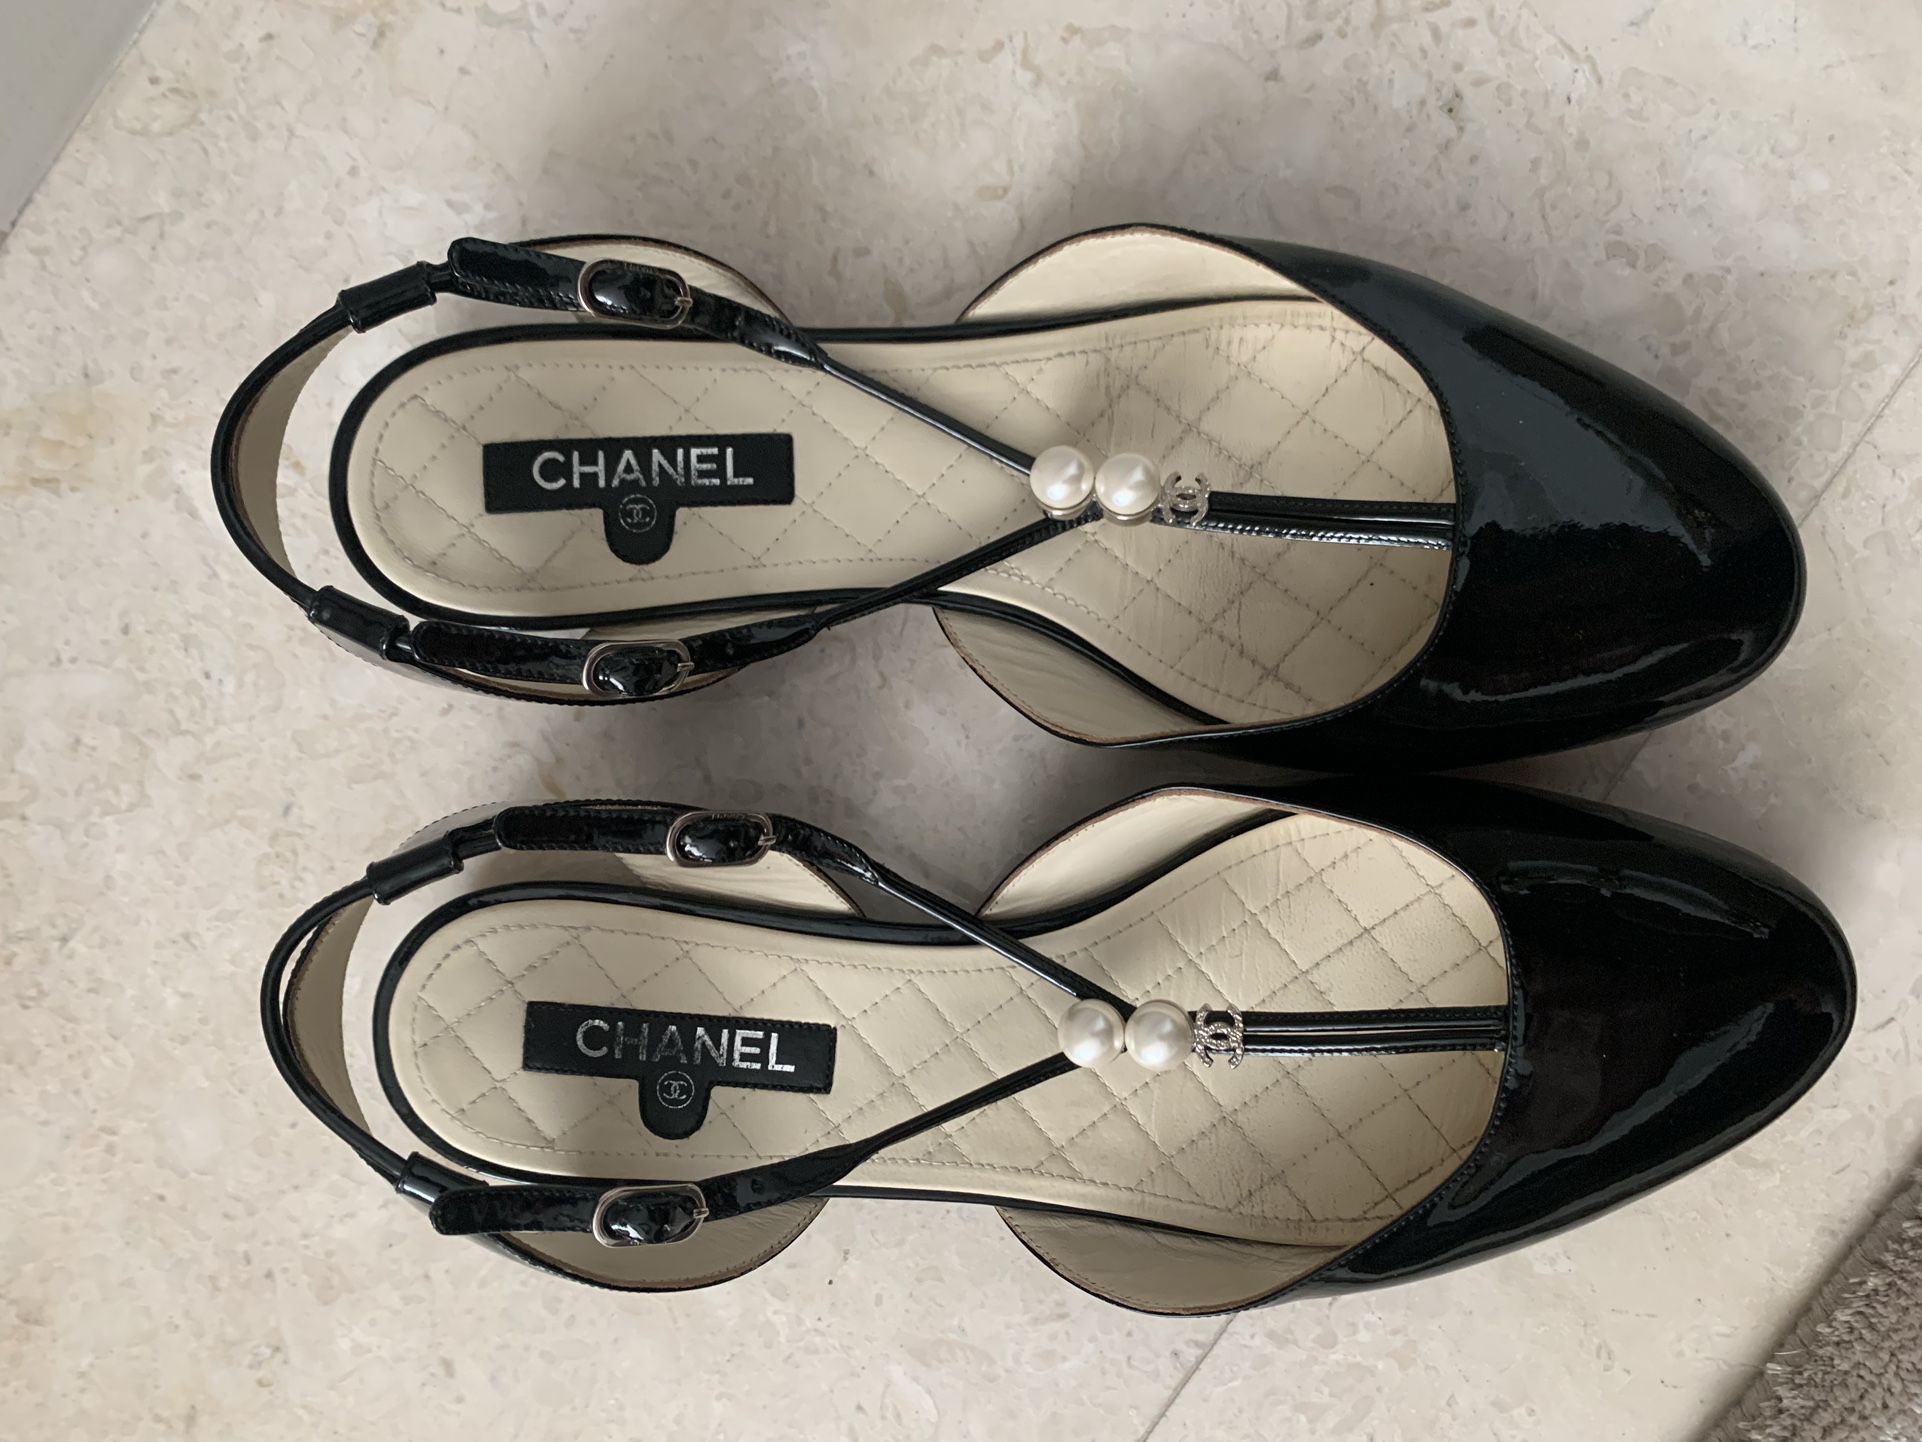 Summer Shoes, Sunglasses Chanel, Prada, Gucci for Sale in Bal